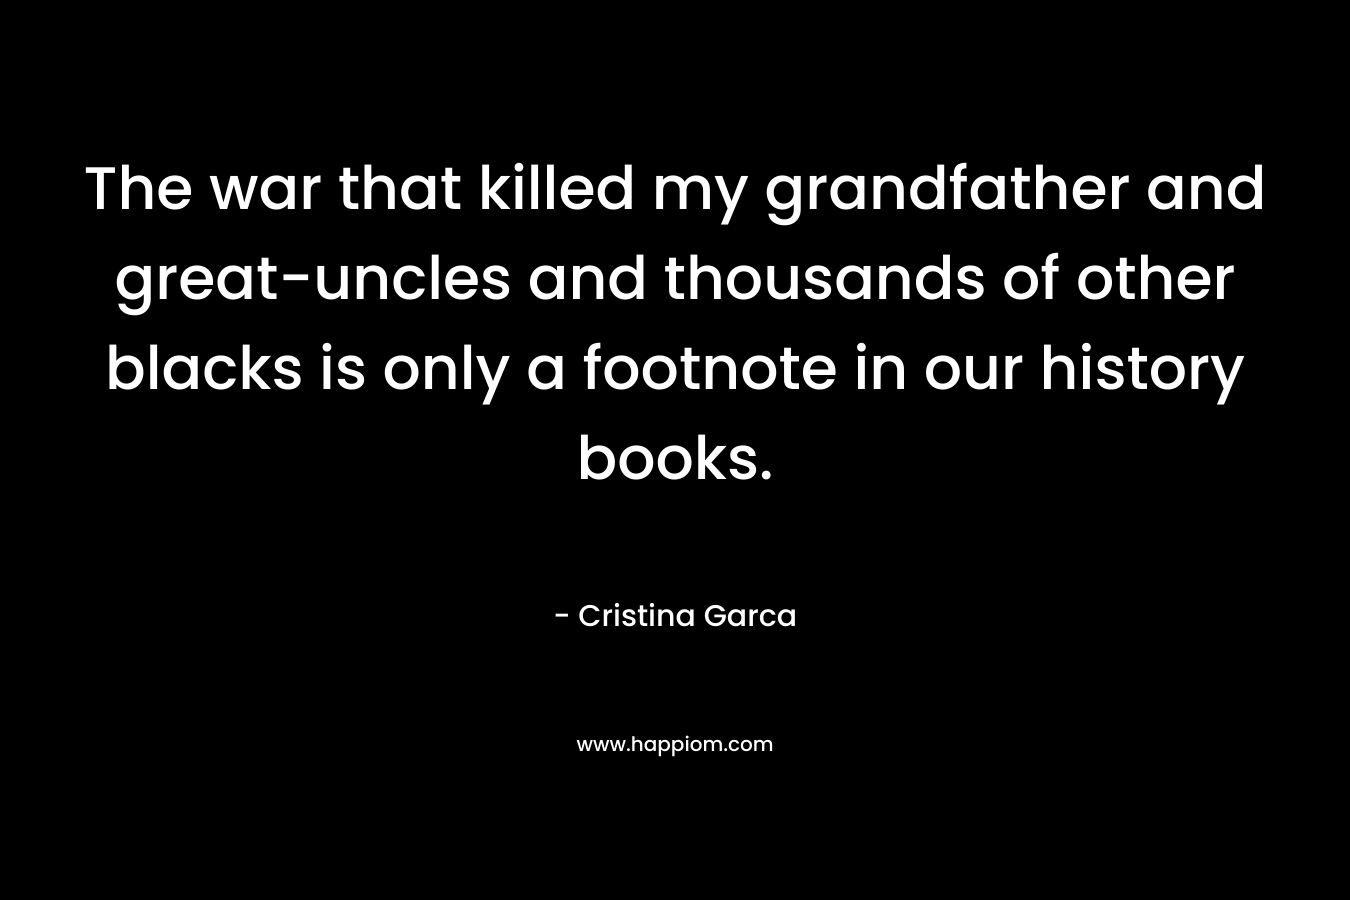 The war that killed my grandfather and great-uncles and thousands of other blacks is only a footnote in our history books. – Cristina Garca